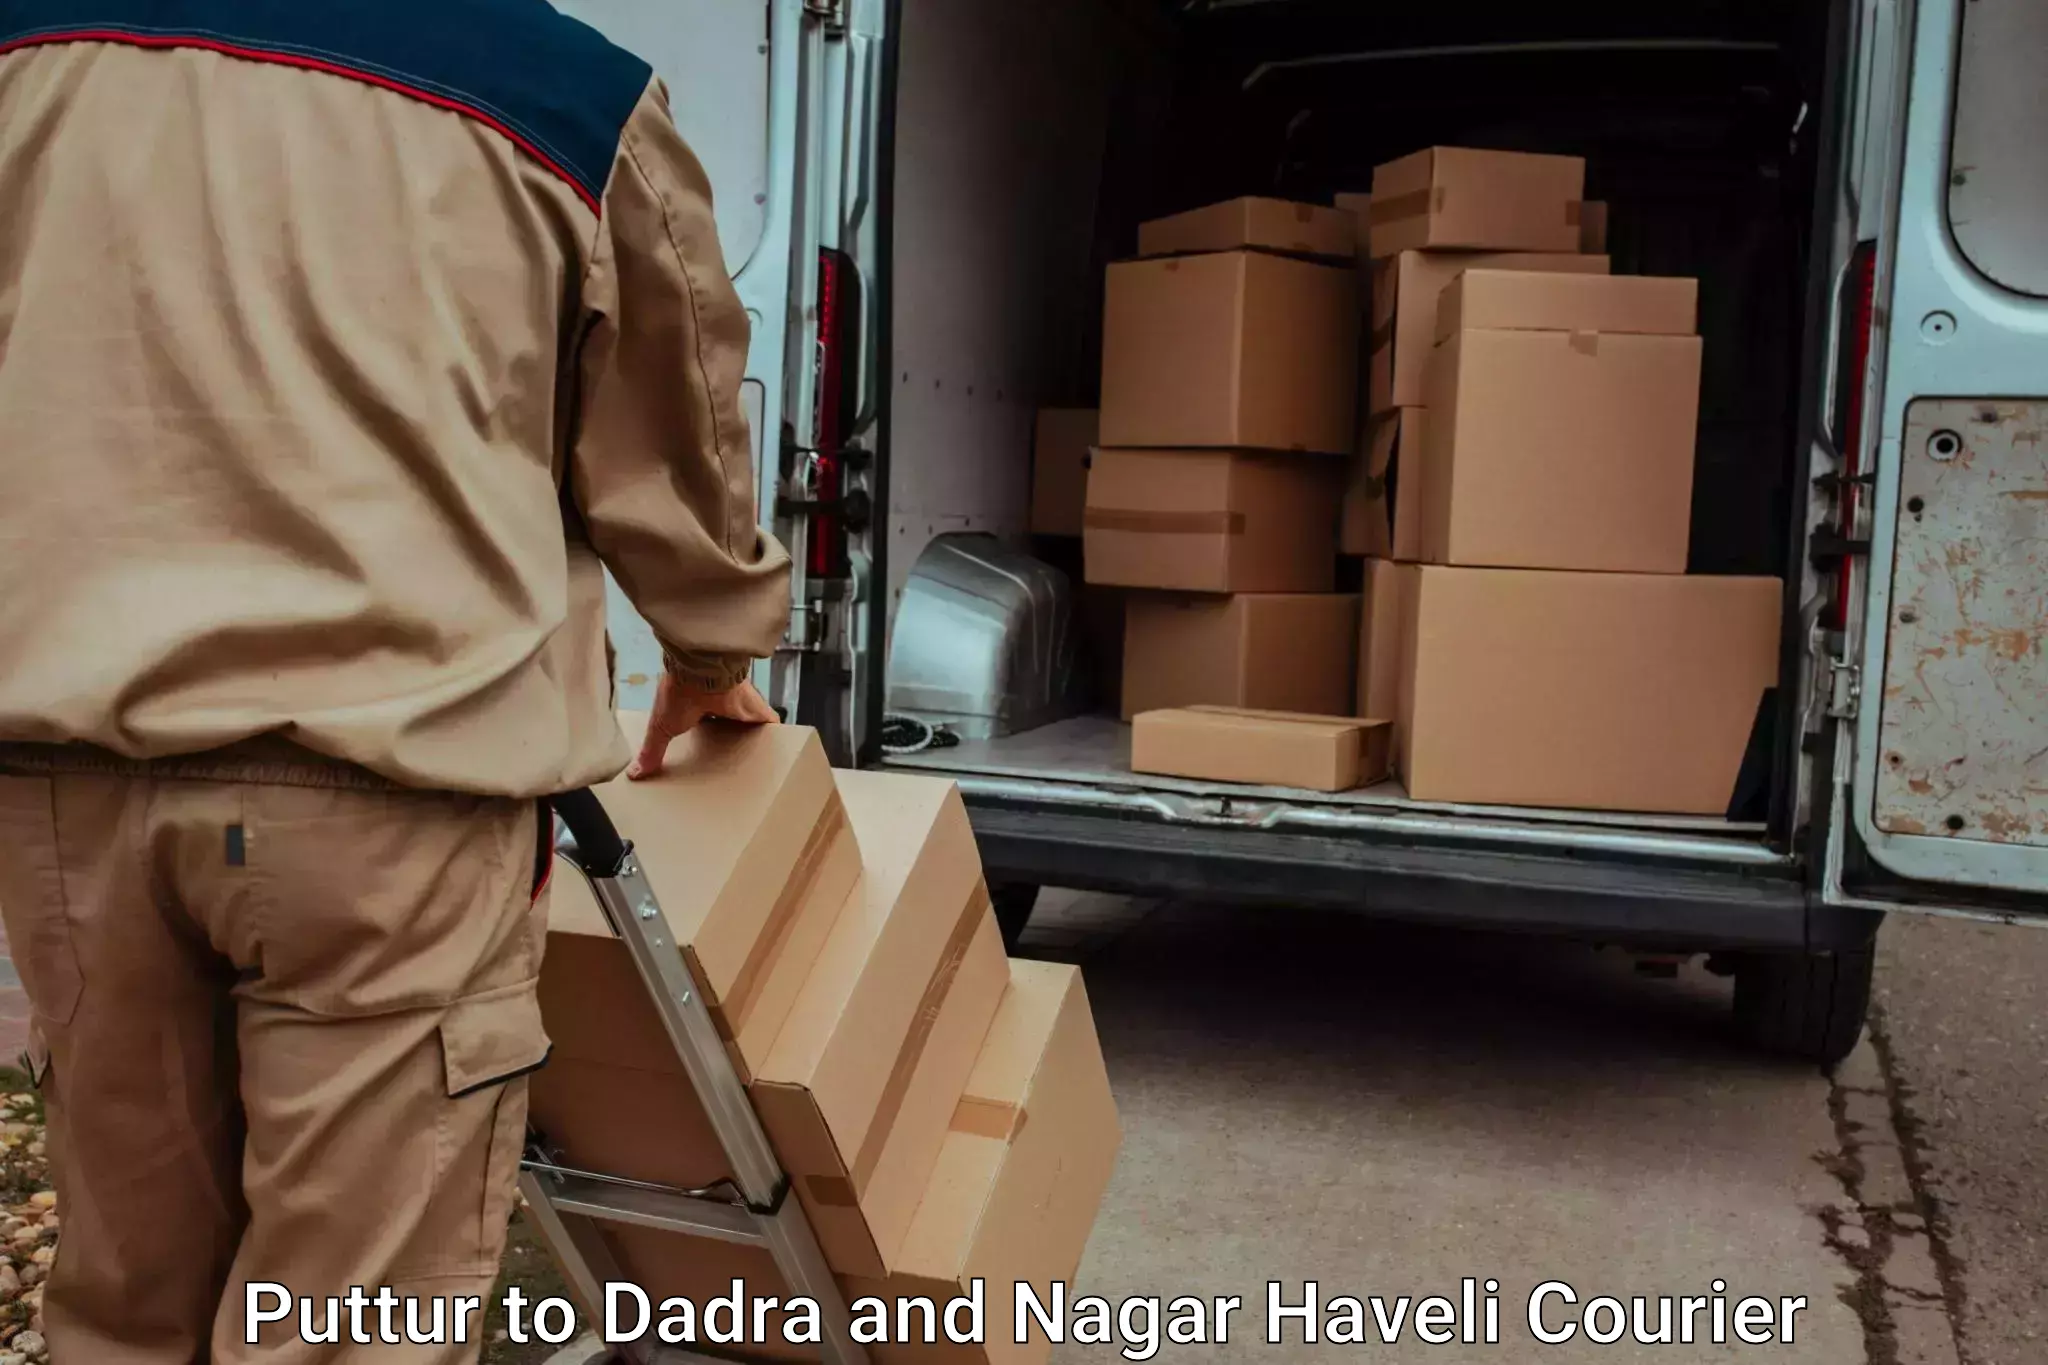 Home moving experts Puttur to Dadra and Nagar Haveli